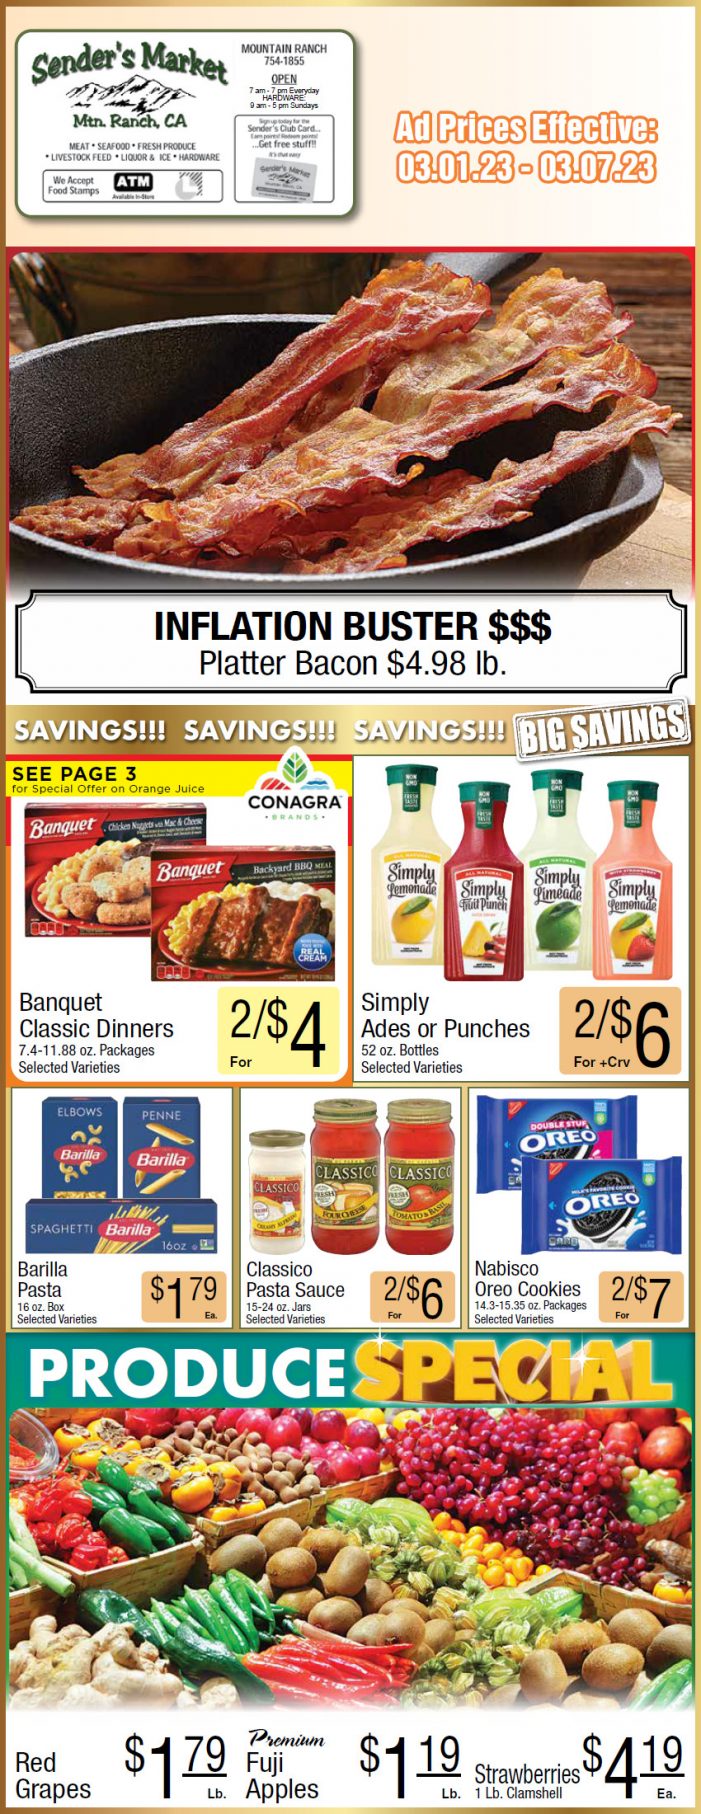 Sender’s Market Weekly Ad & Grocery Specials Through March 7th! Shop Local & Save!!